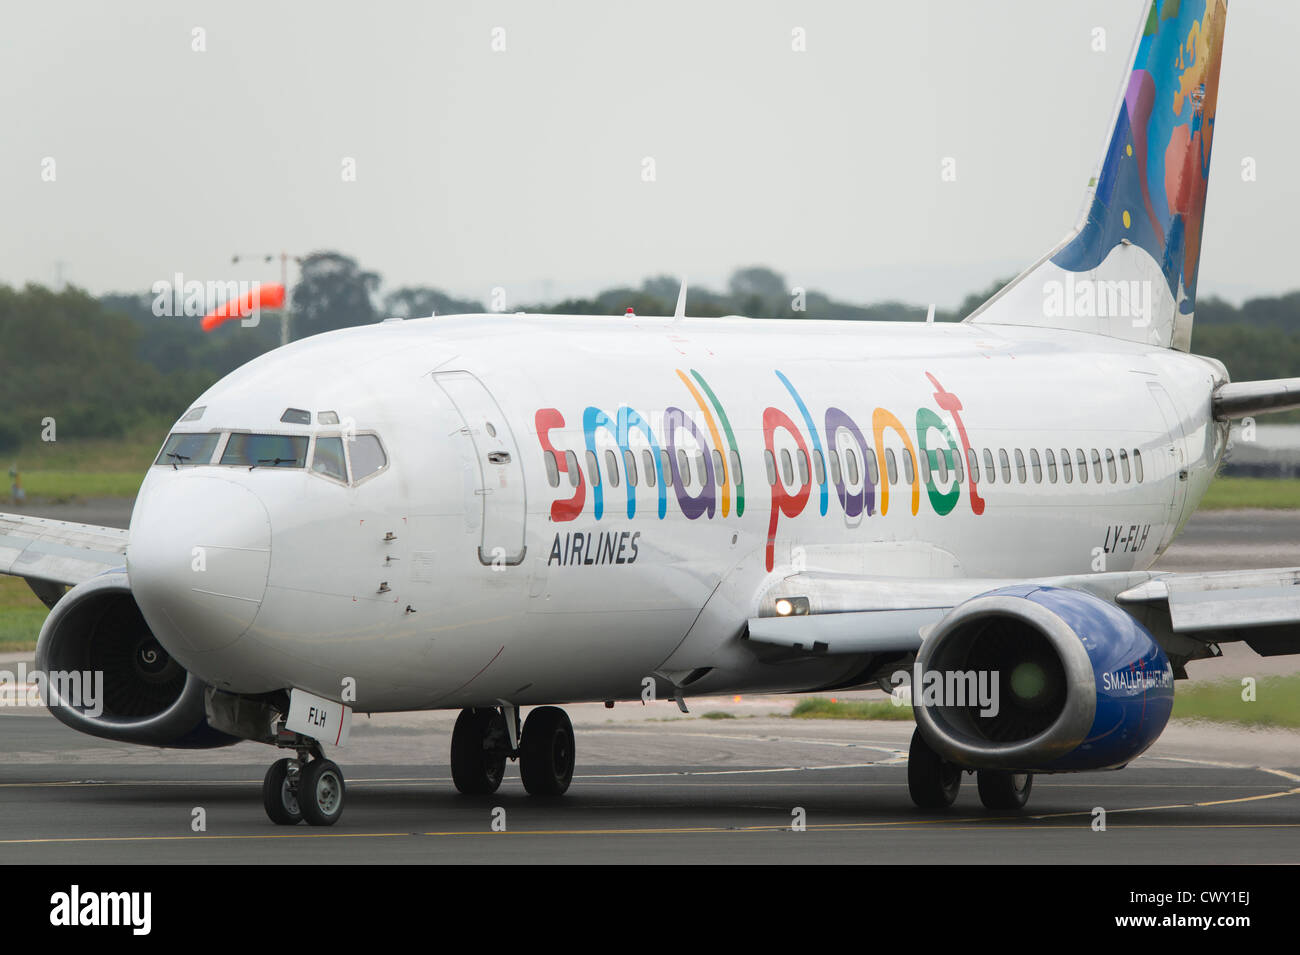 A Lithuanian Small Planet Airlines Boeing 737 taxiing on the runway of Manchester International Airport (Editorial use only) Stock Photo